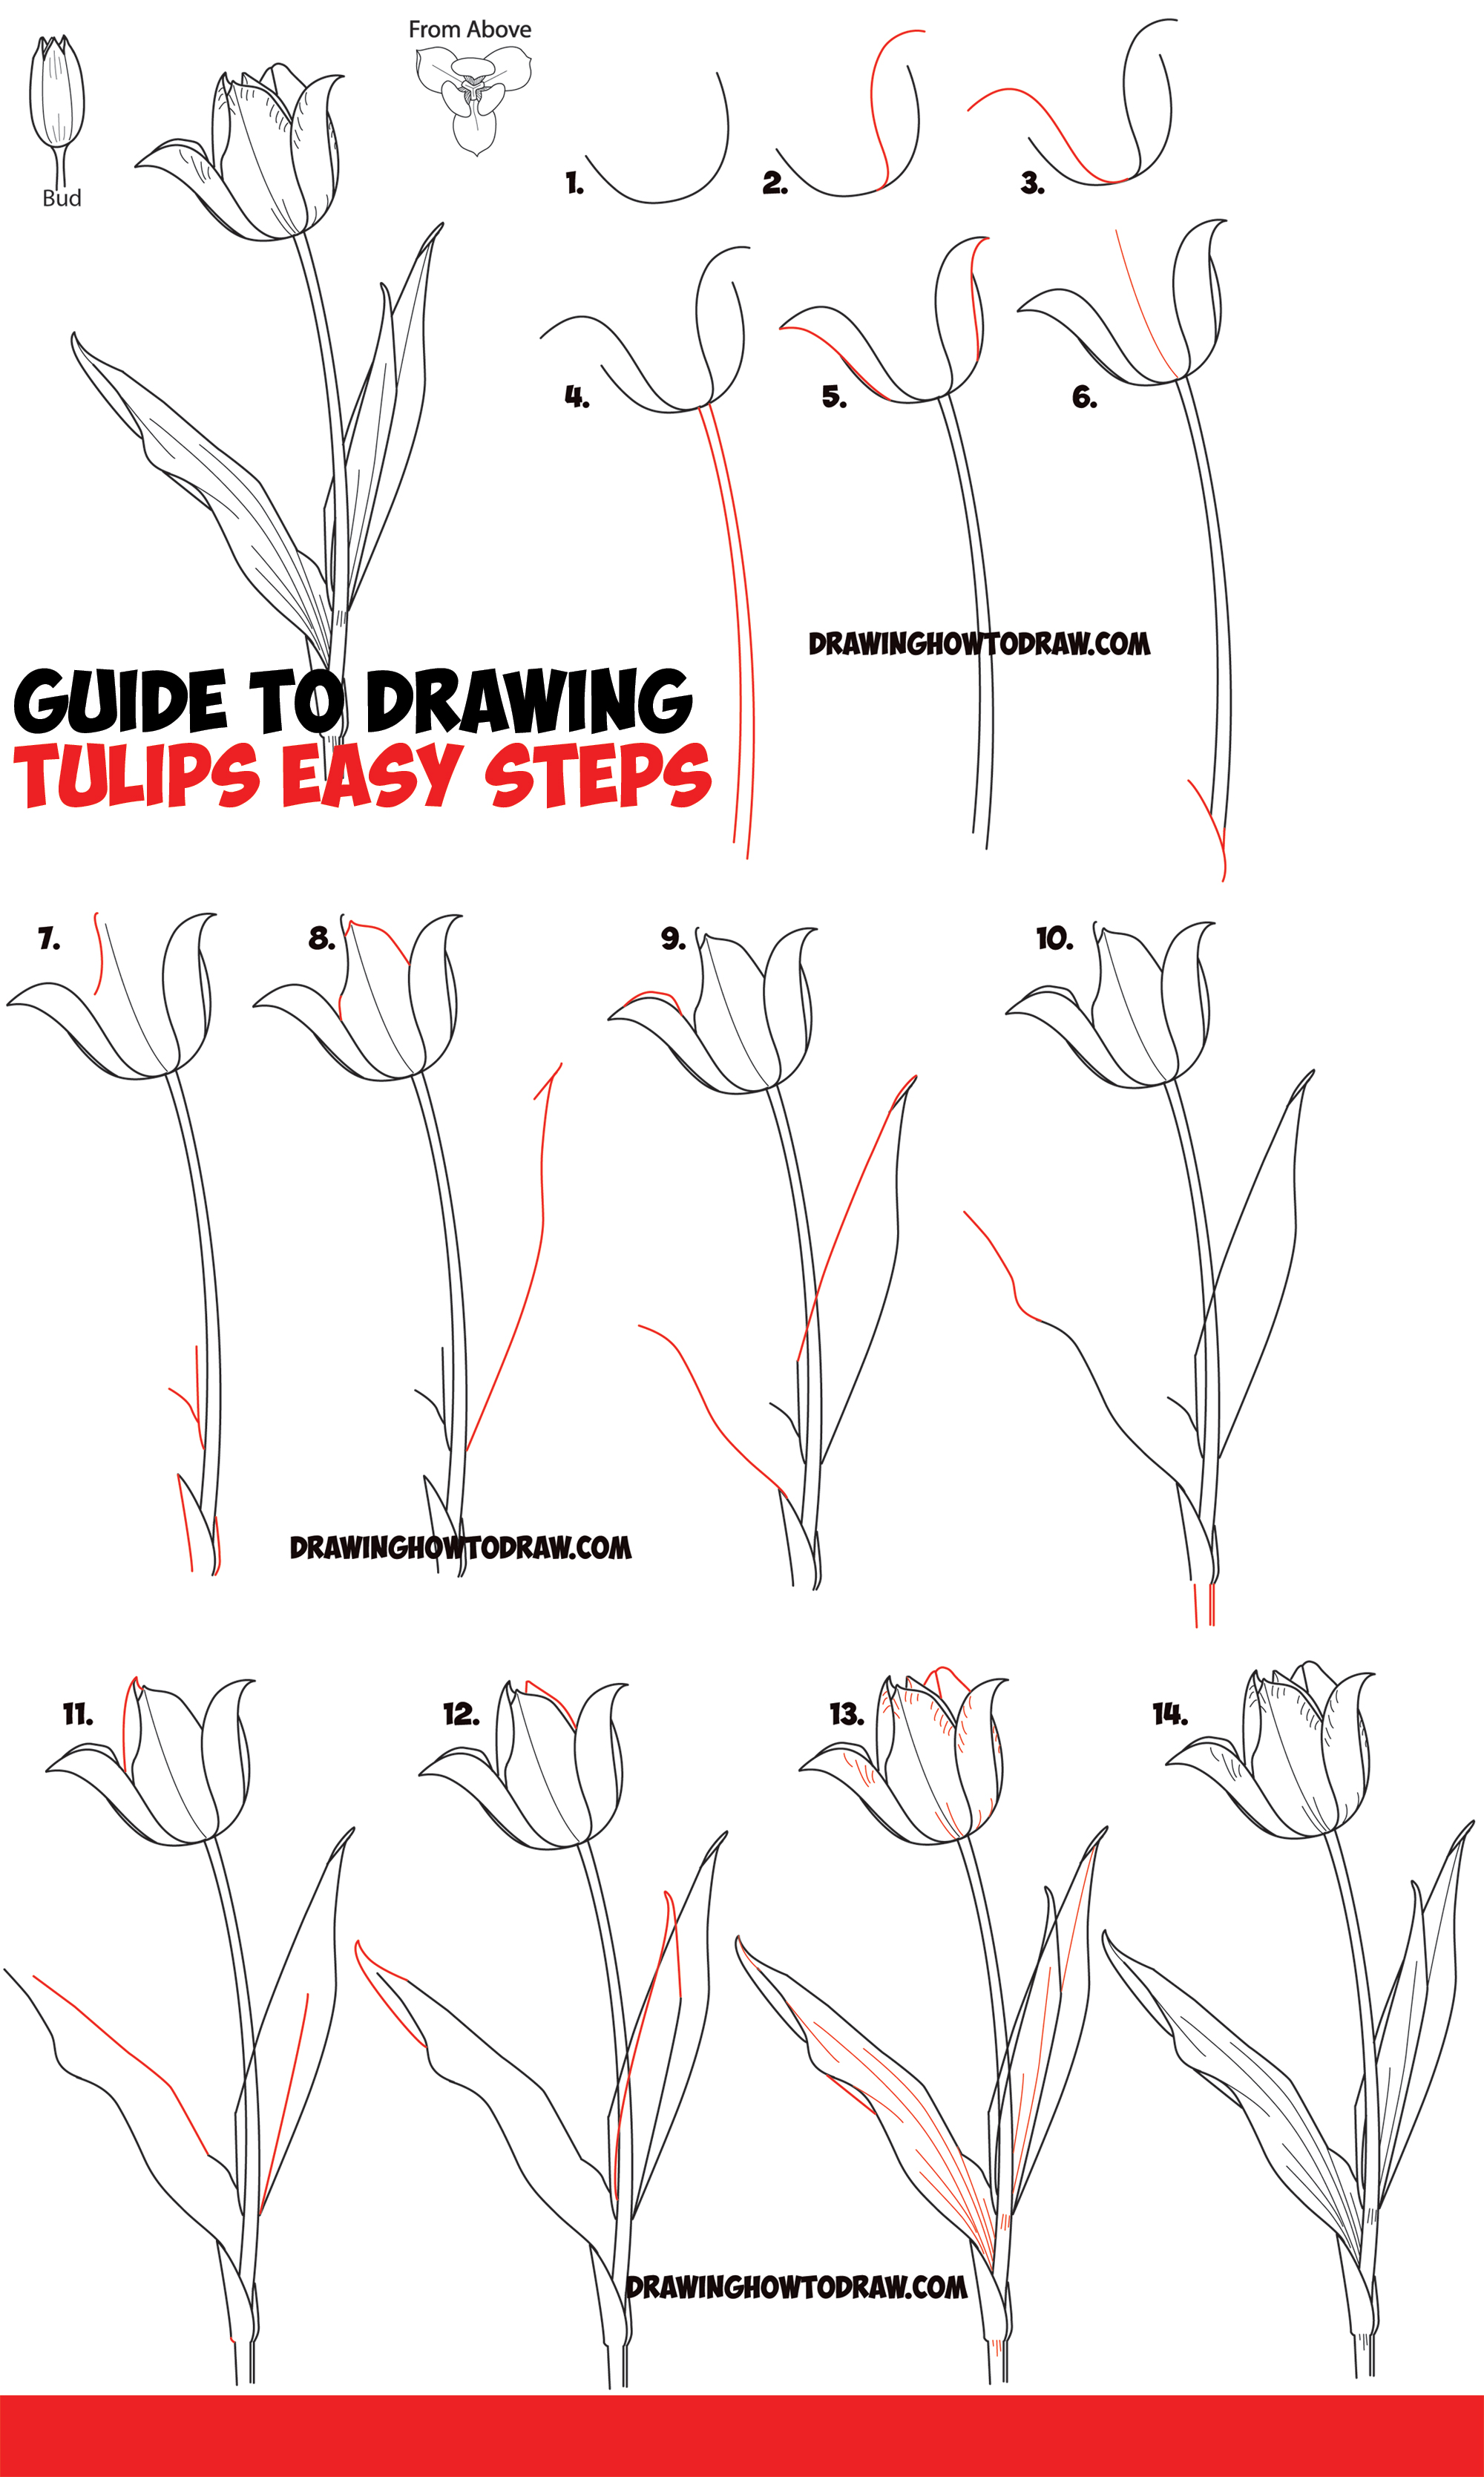 How to Draw Tulips Easy Guide to Drawing Tulips from